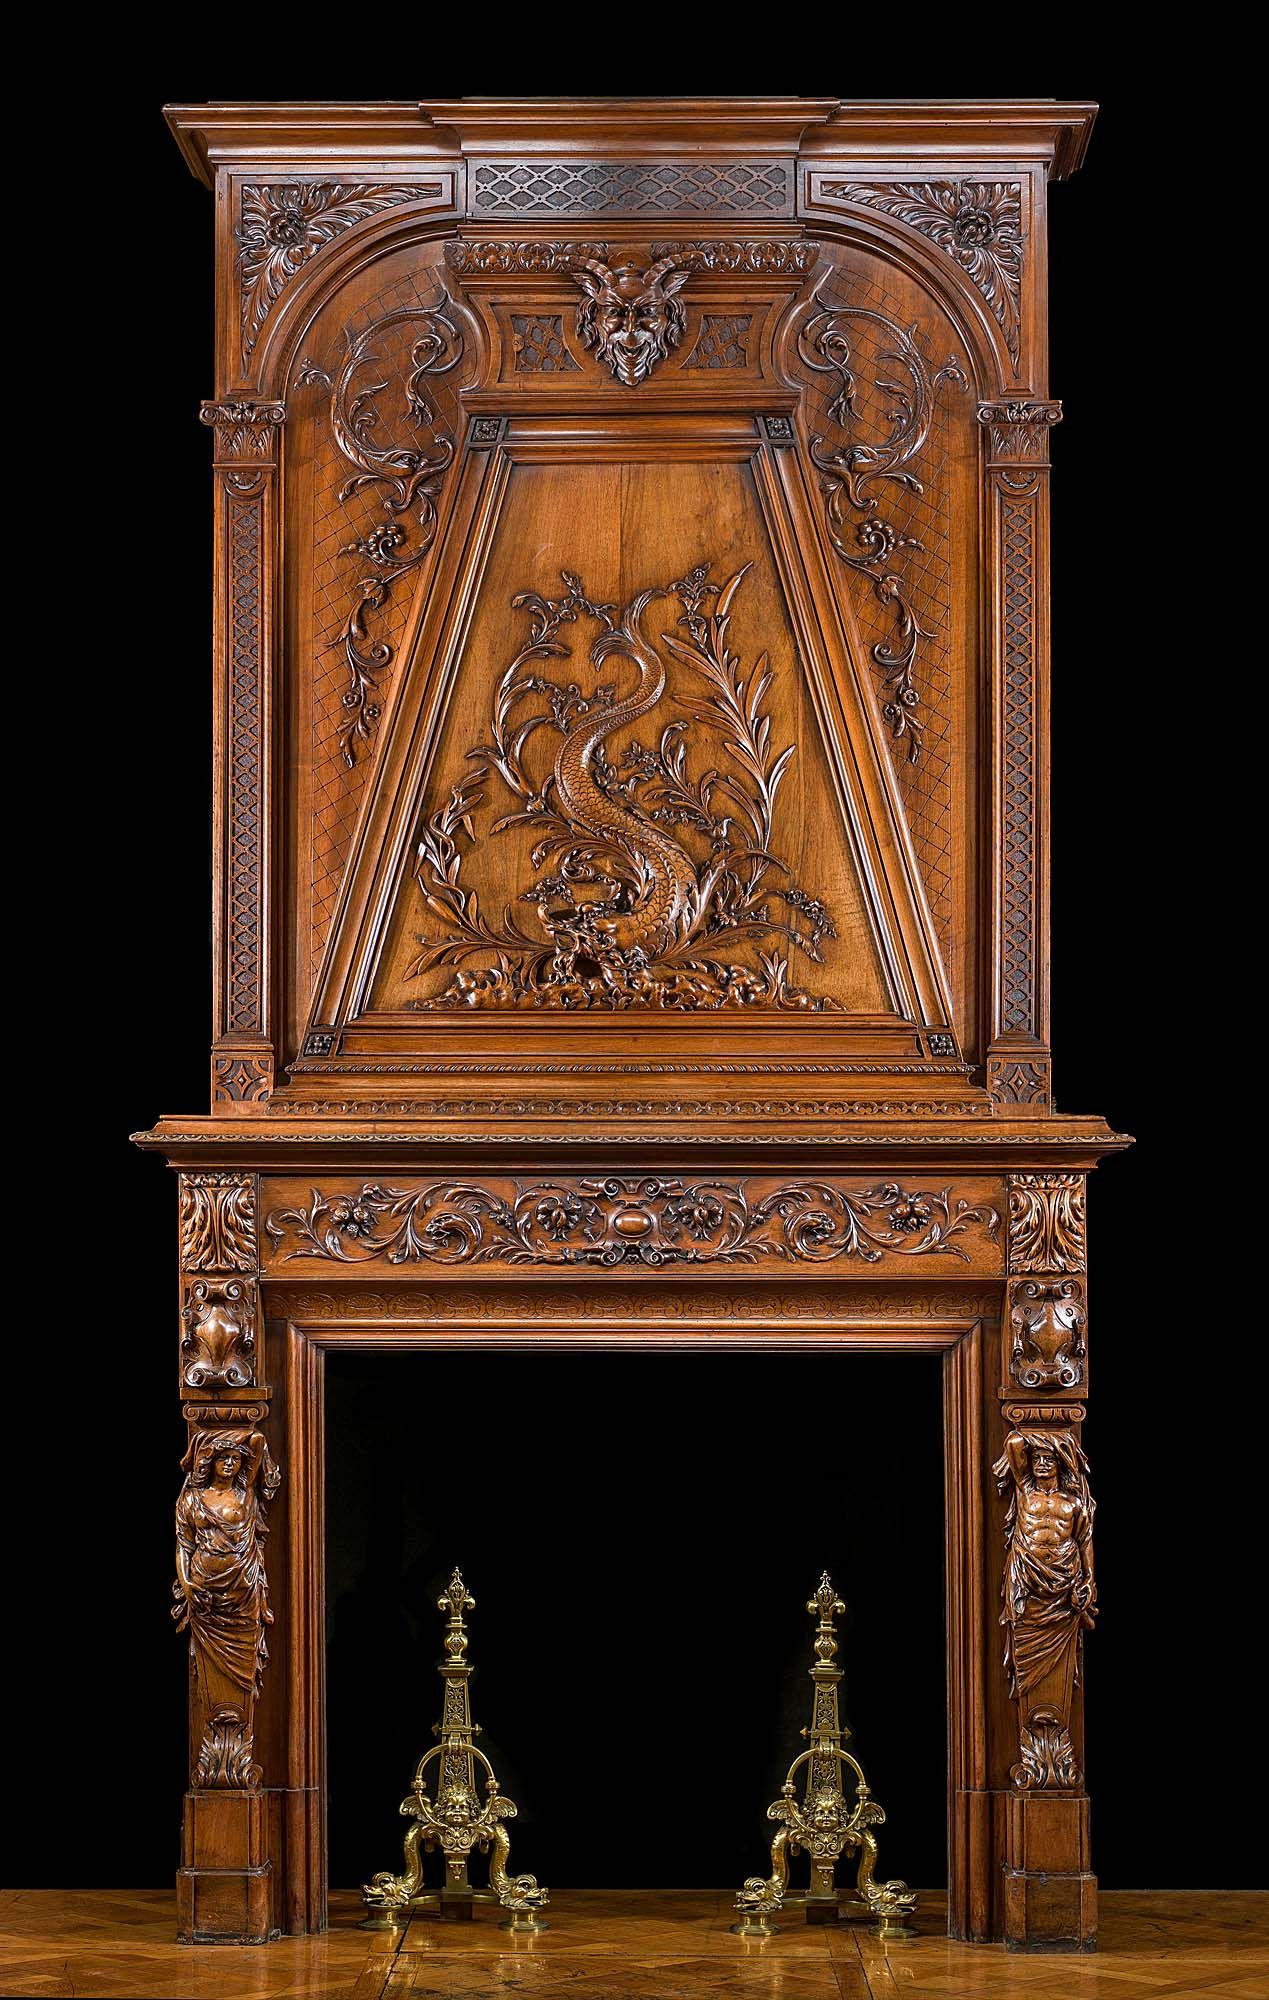 Antique Fireplace Cover Luxury A Beautiful Tall and Elegant Walnut Wood Antique Trumeau